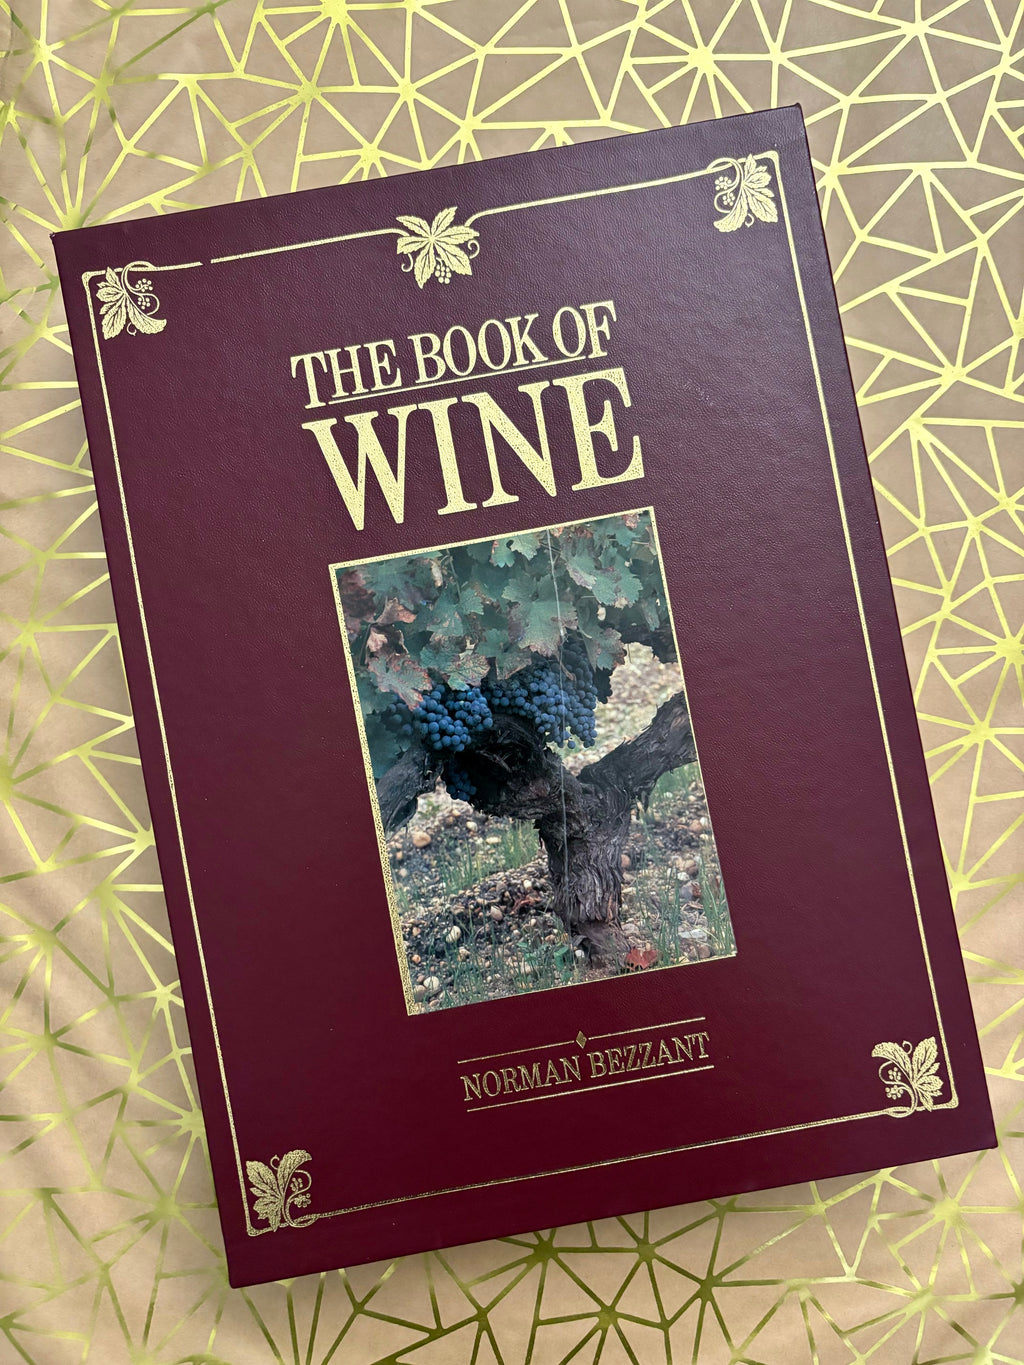 The Book of Wine- By Norman Bezzant